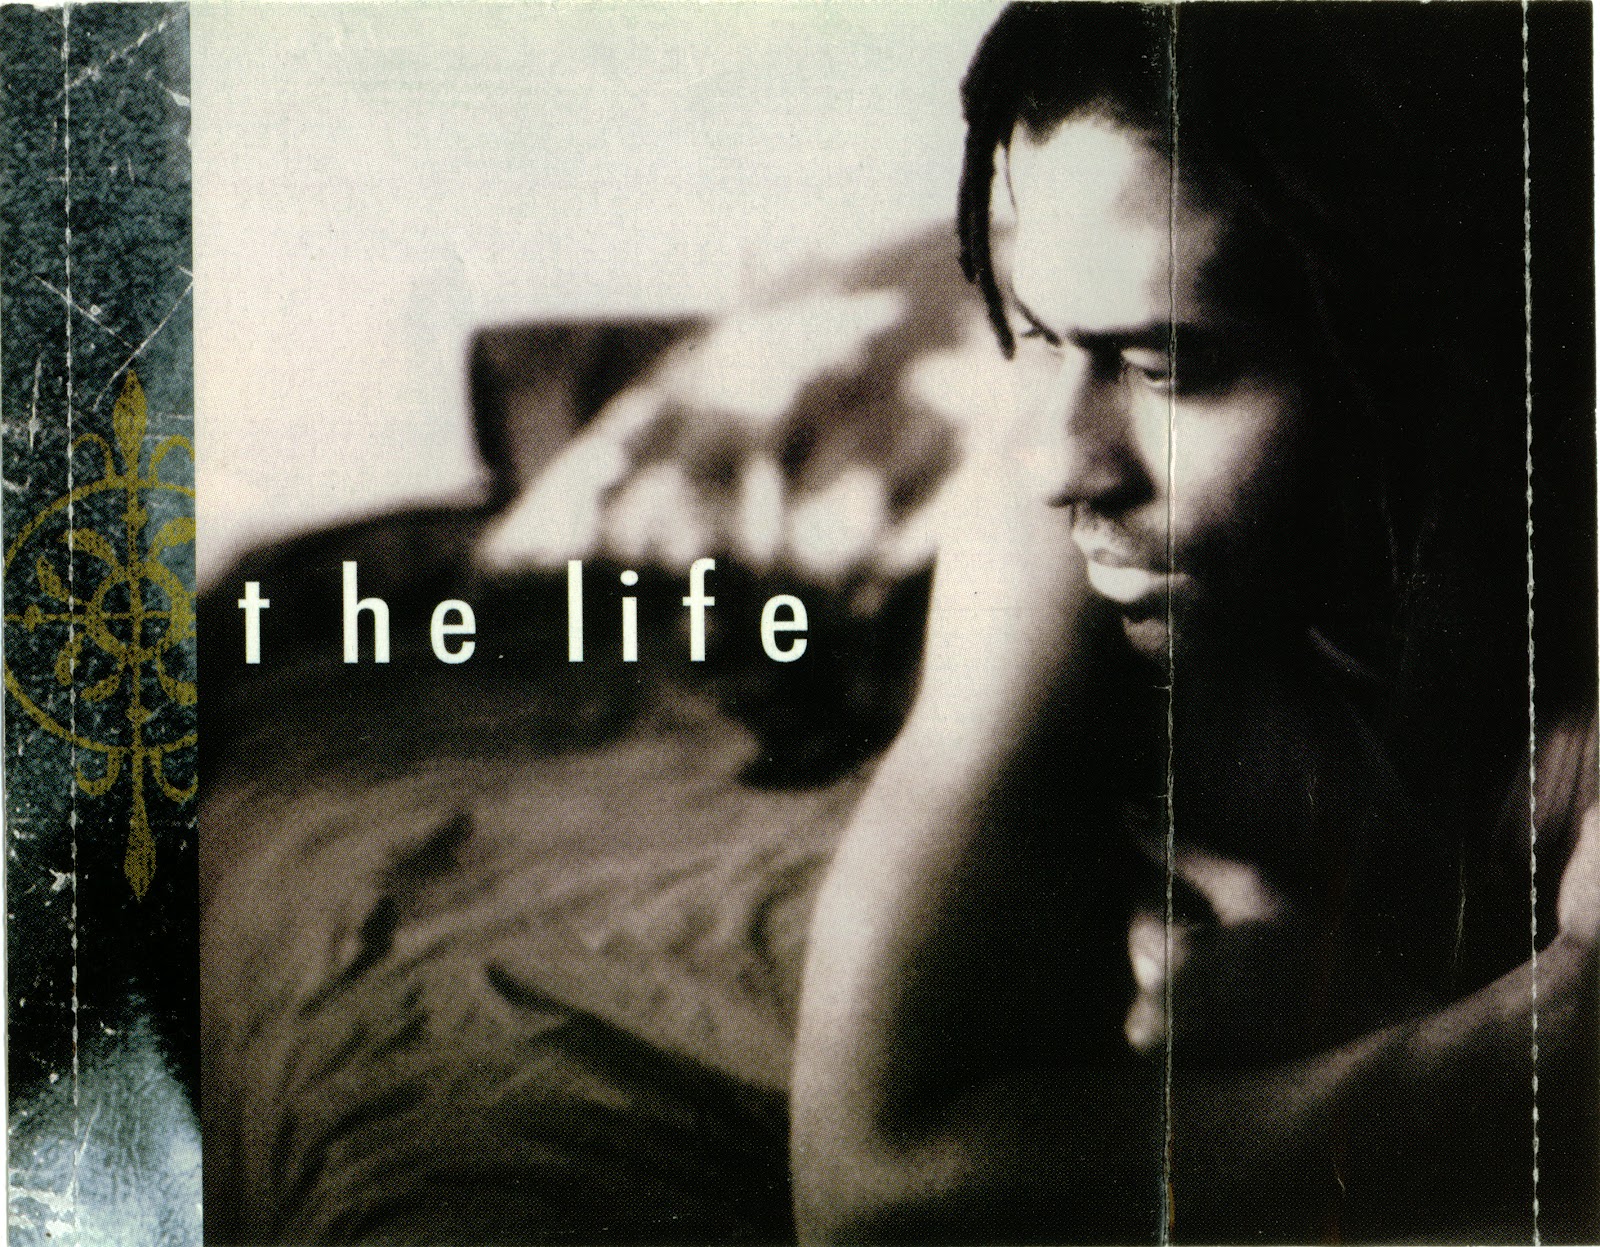 Promo Import Retail Cd Singles And Albums Eric Benet A Day In The Life Full Cd Lp 1999